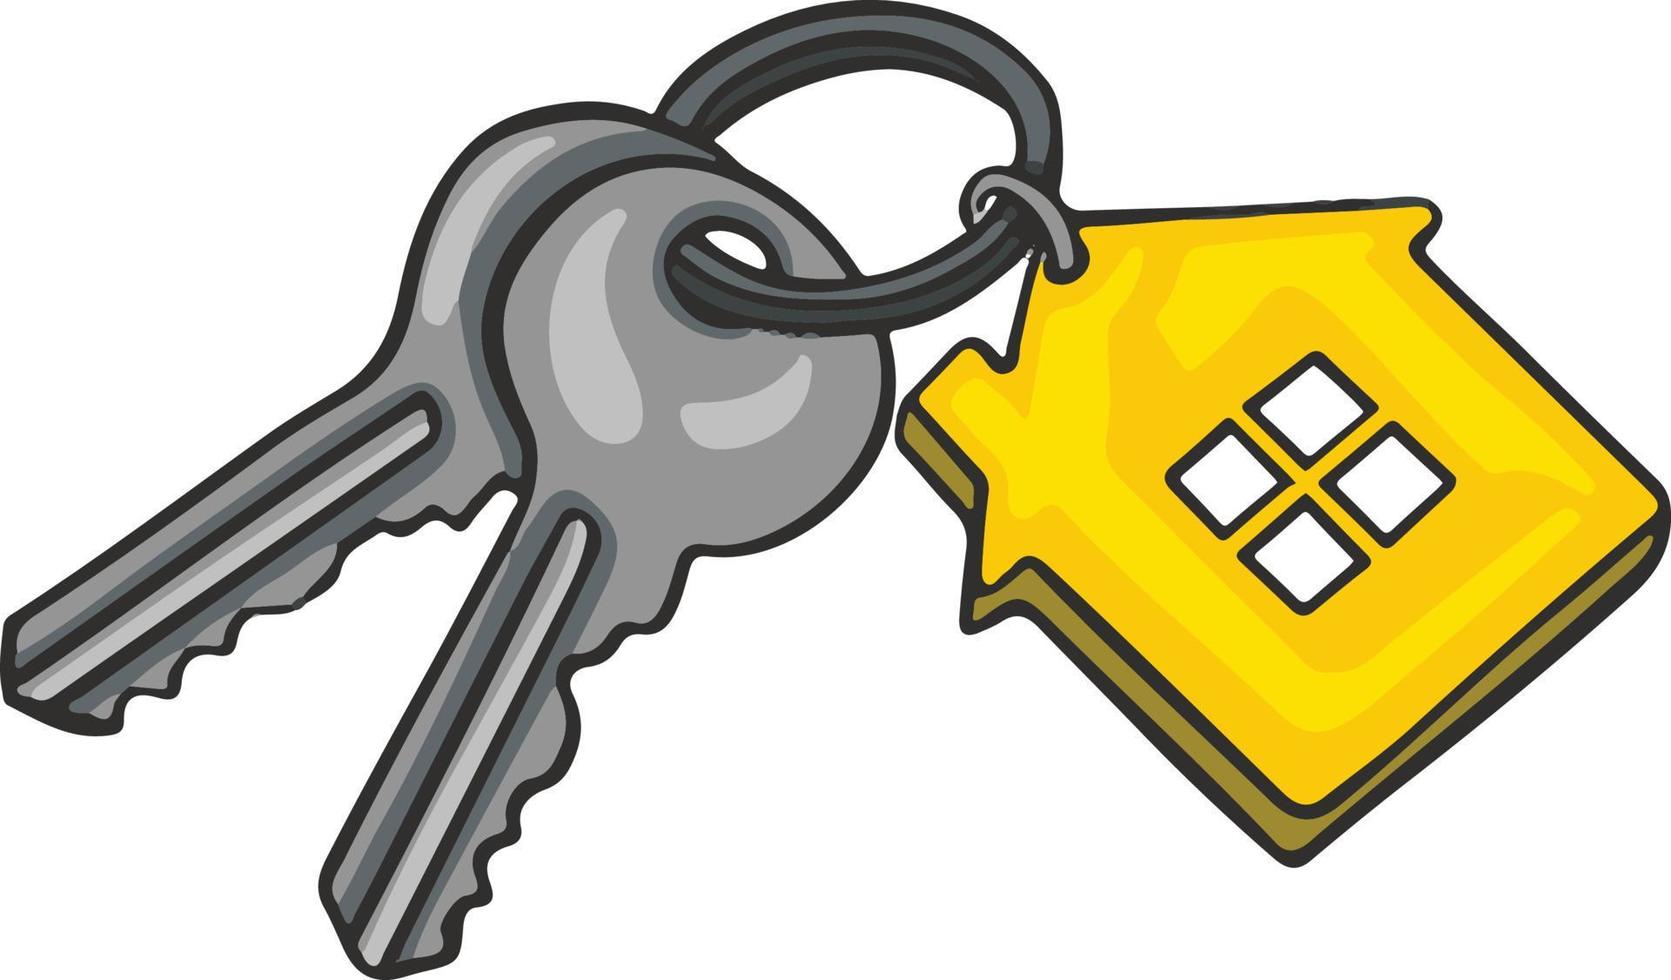 Keys to a new house real estate purchase, a logo   realtor vector